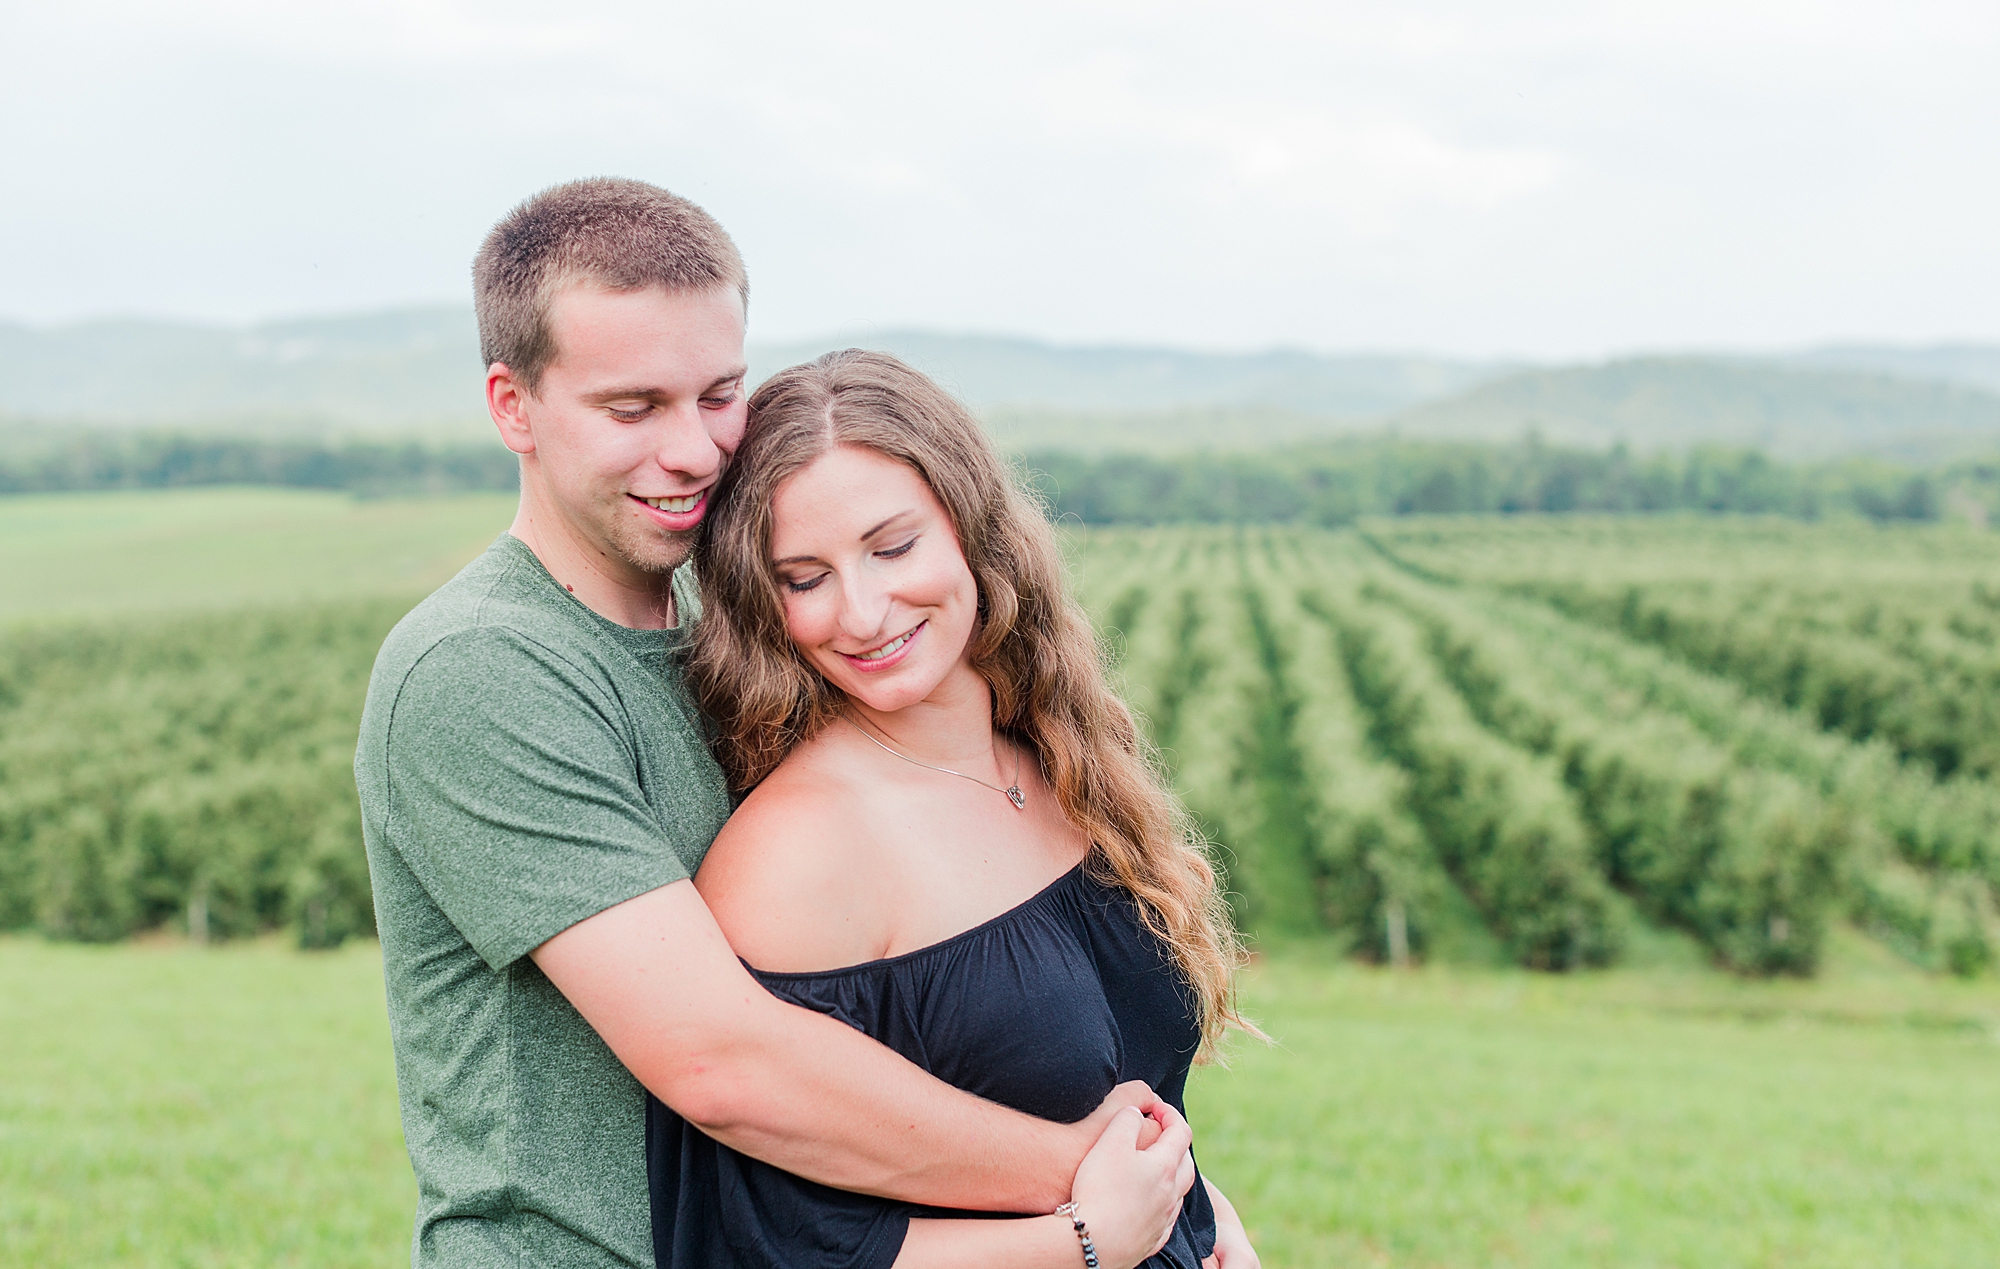 Couple hugging during engagement session at vineyard.